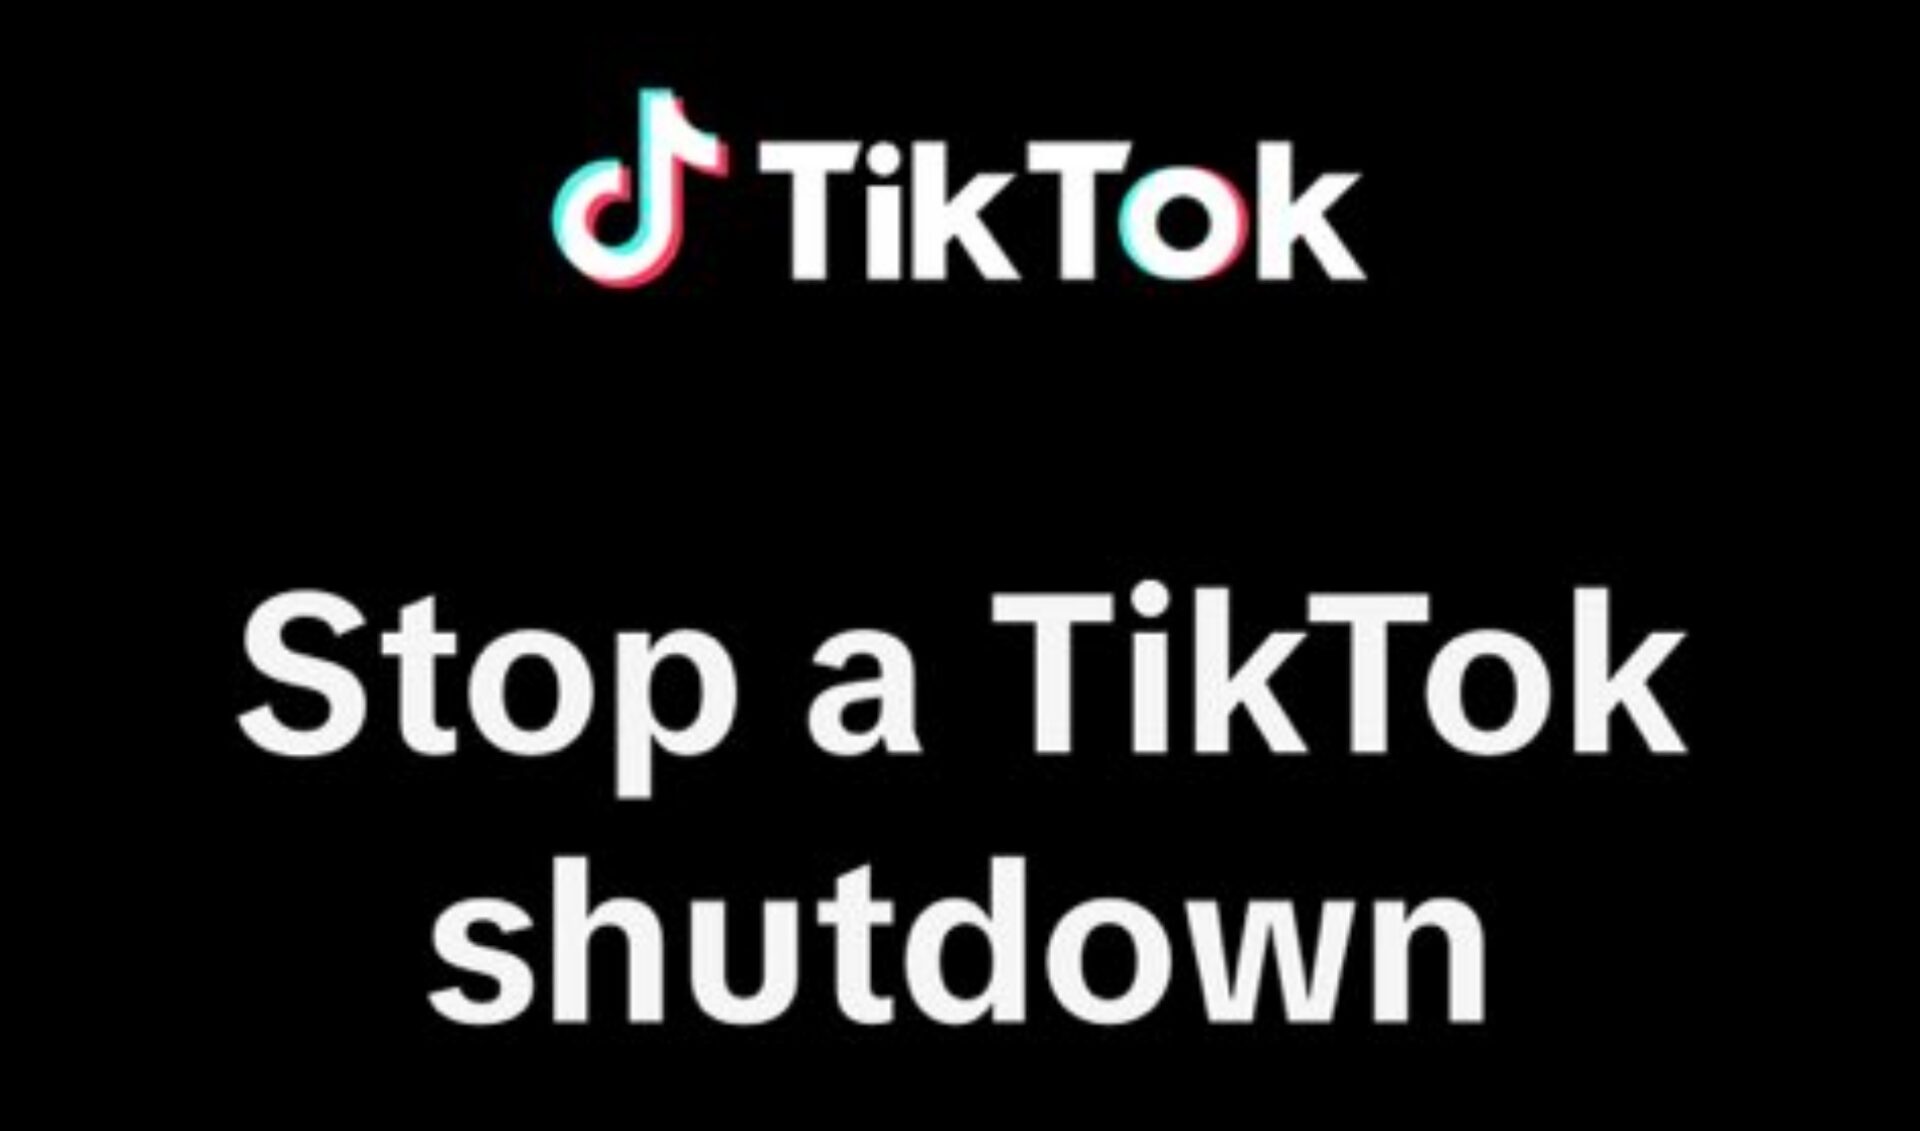 TikTok wants its users to call their representatives to protest a potential U.S. ban